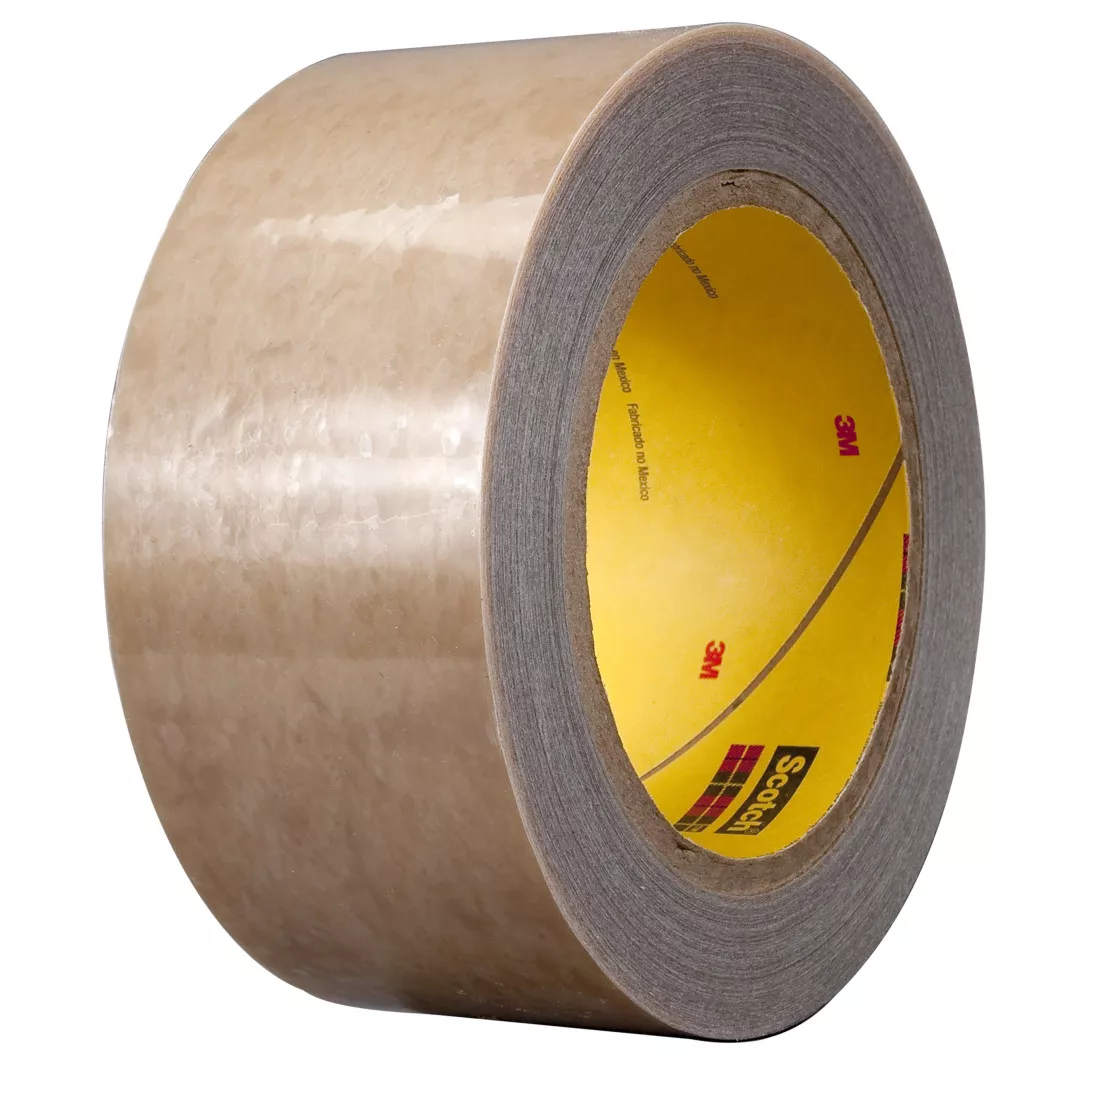 3M™ Polyester Protective Tape 336, Transparent, 11 3/4 in x 144 yd, 1.5 mil, 1 roll per case